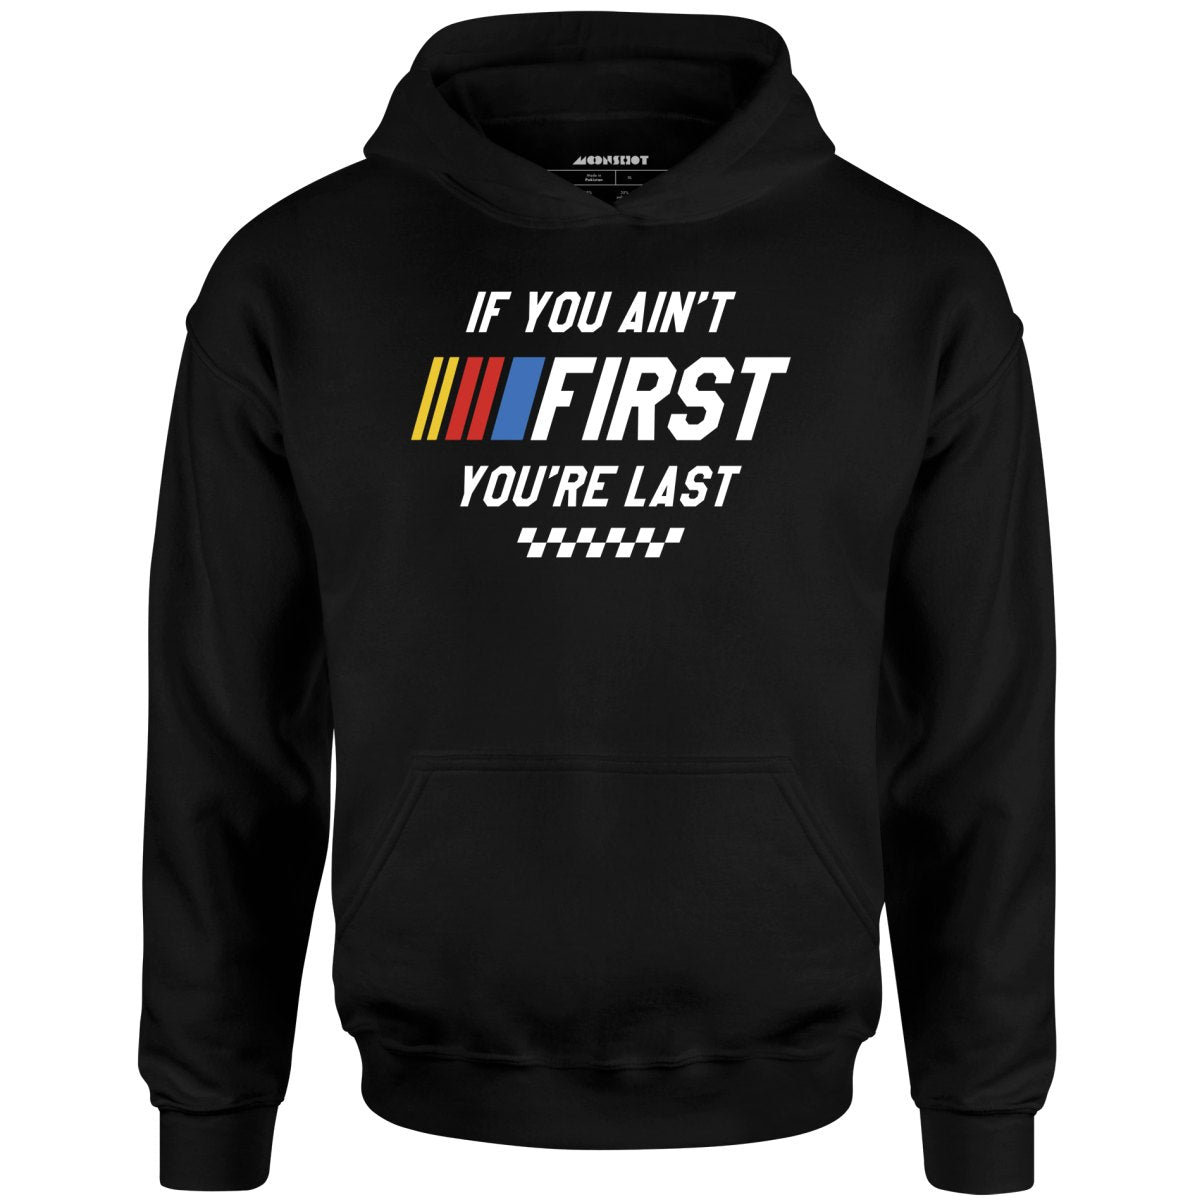 If You Ain't First You're Last - Talladega Nights - Unisex Hoodie